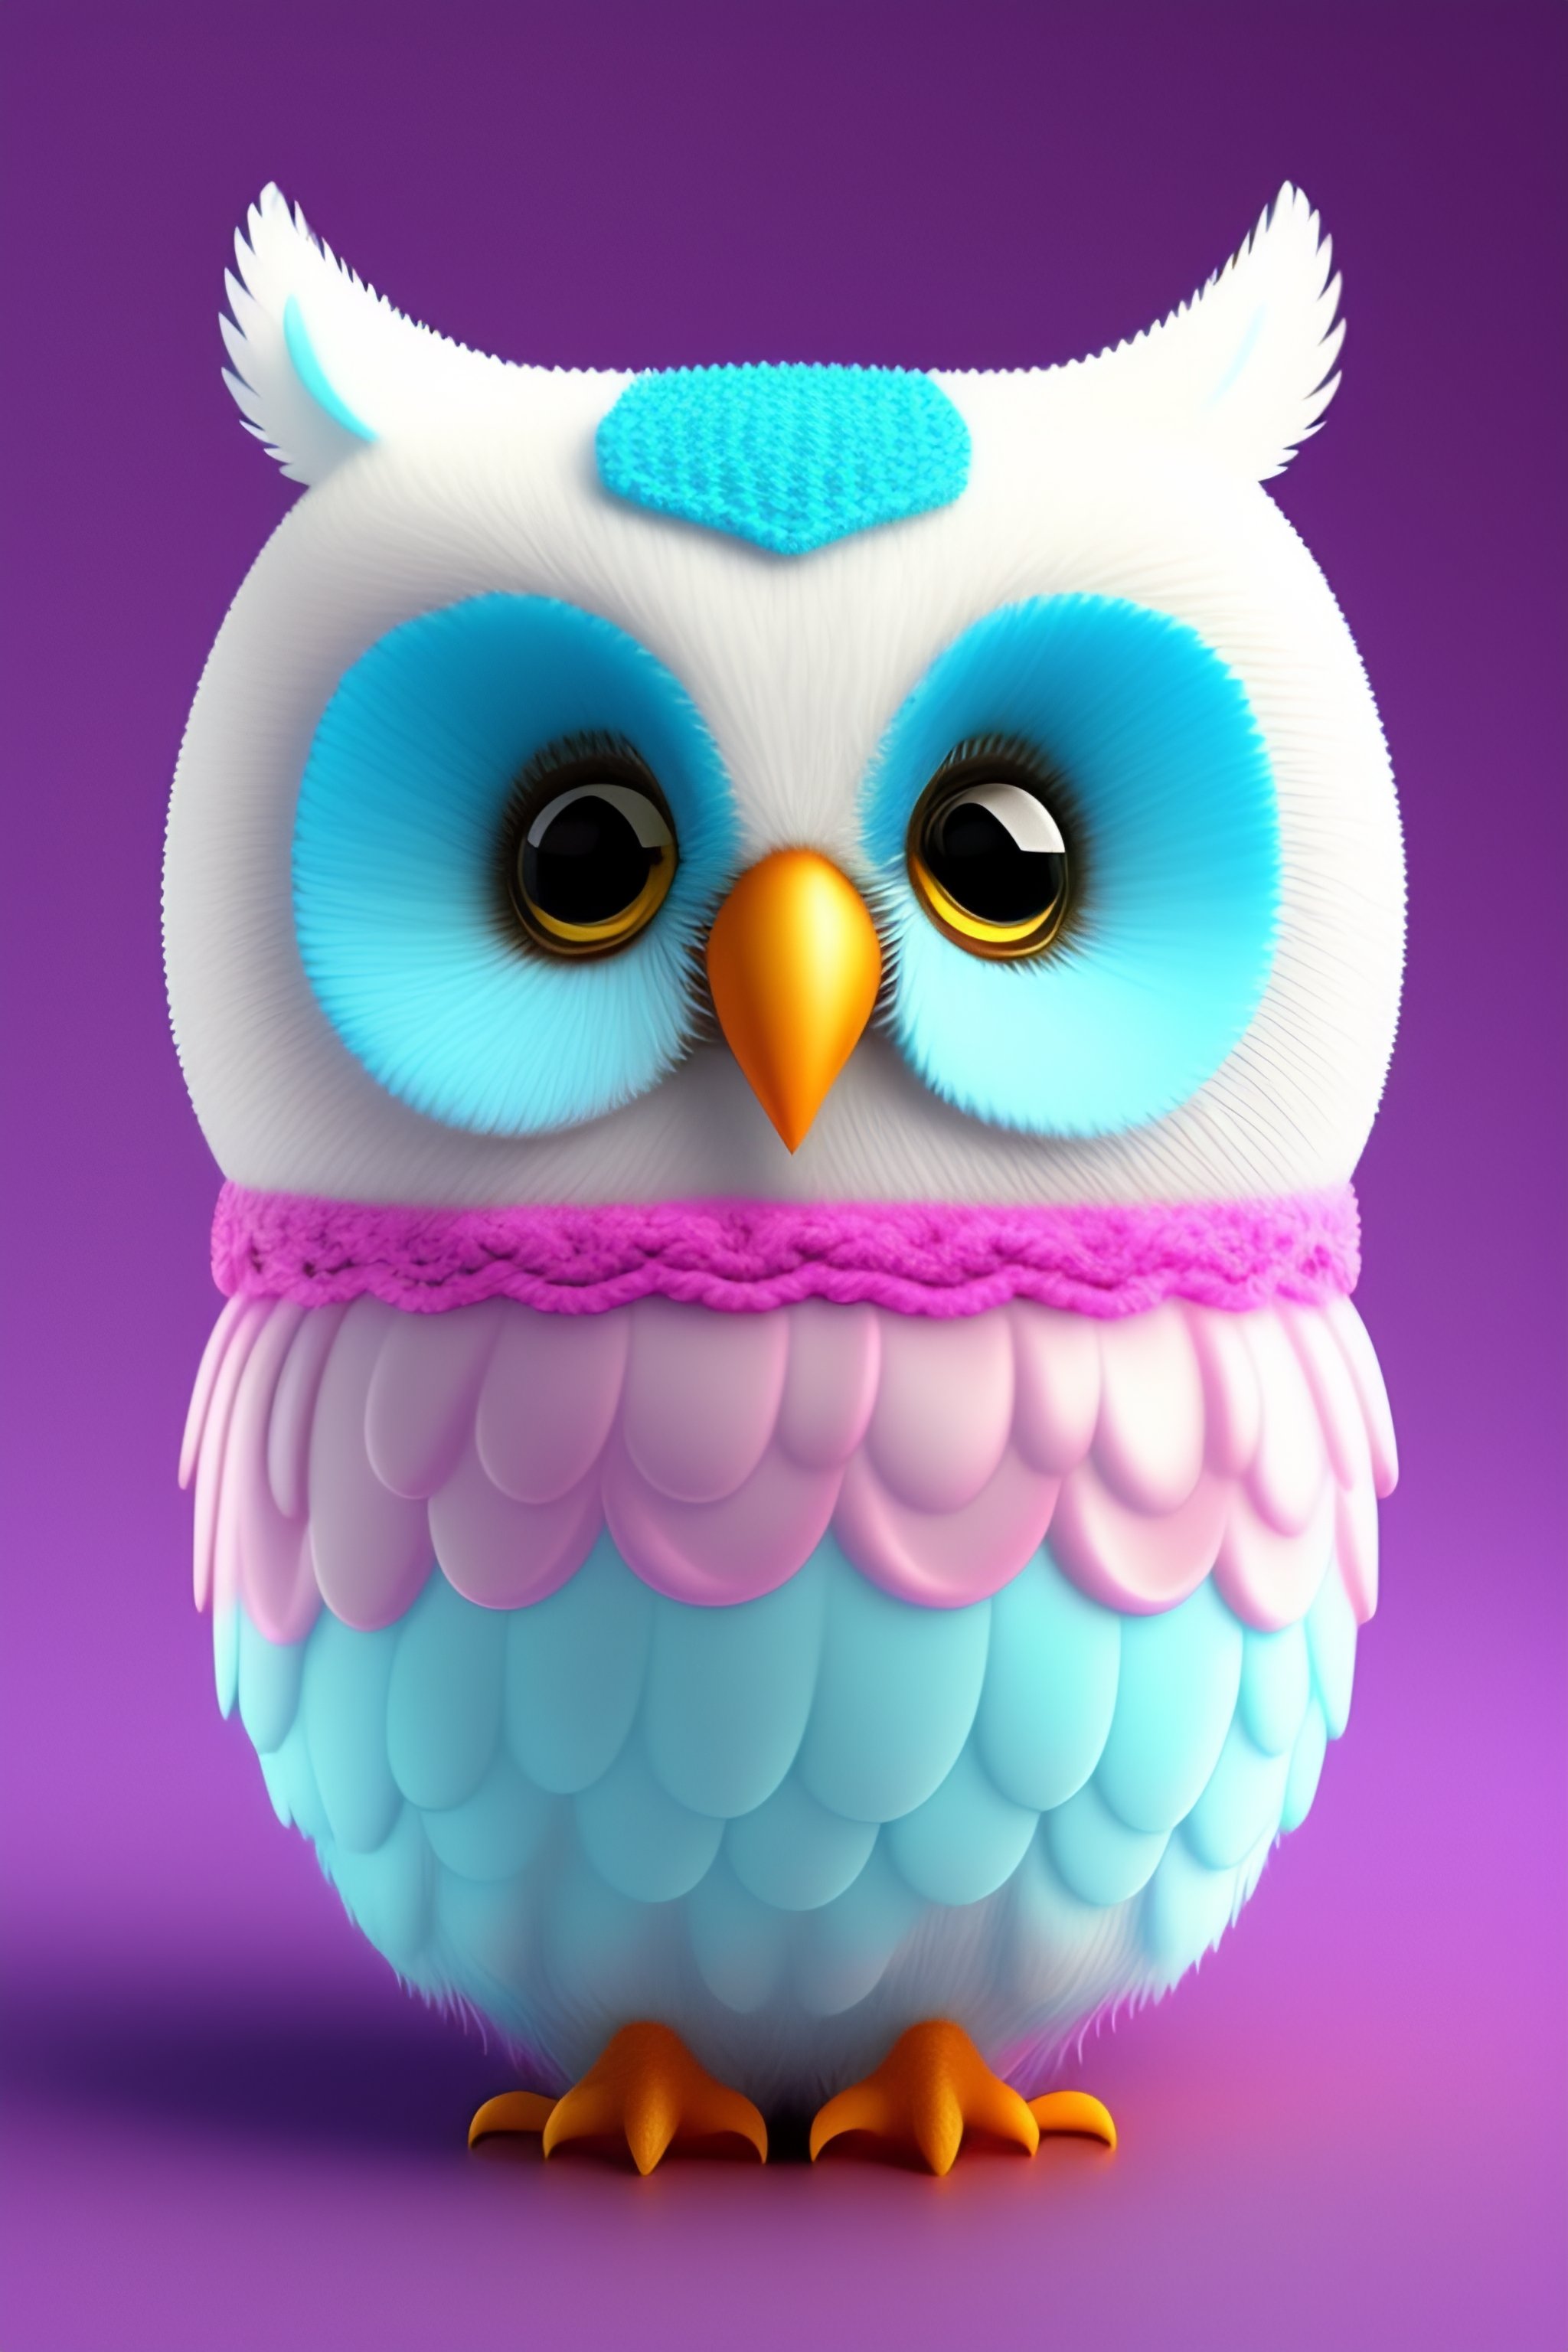 Lexica - Adorable cartoon owl, white, pastel blue and pink.